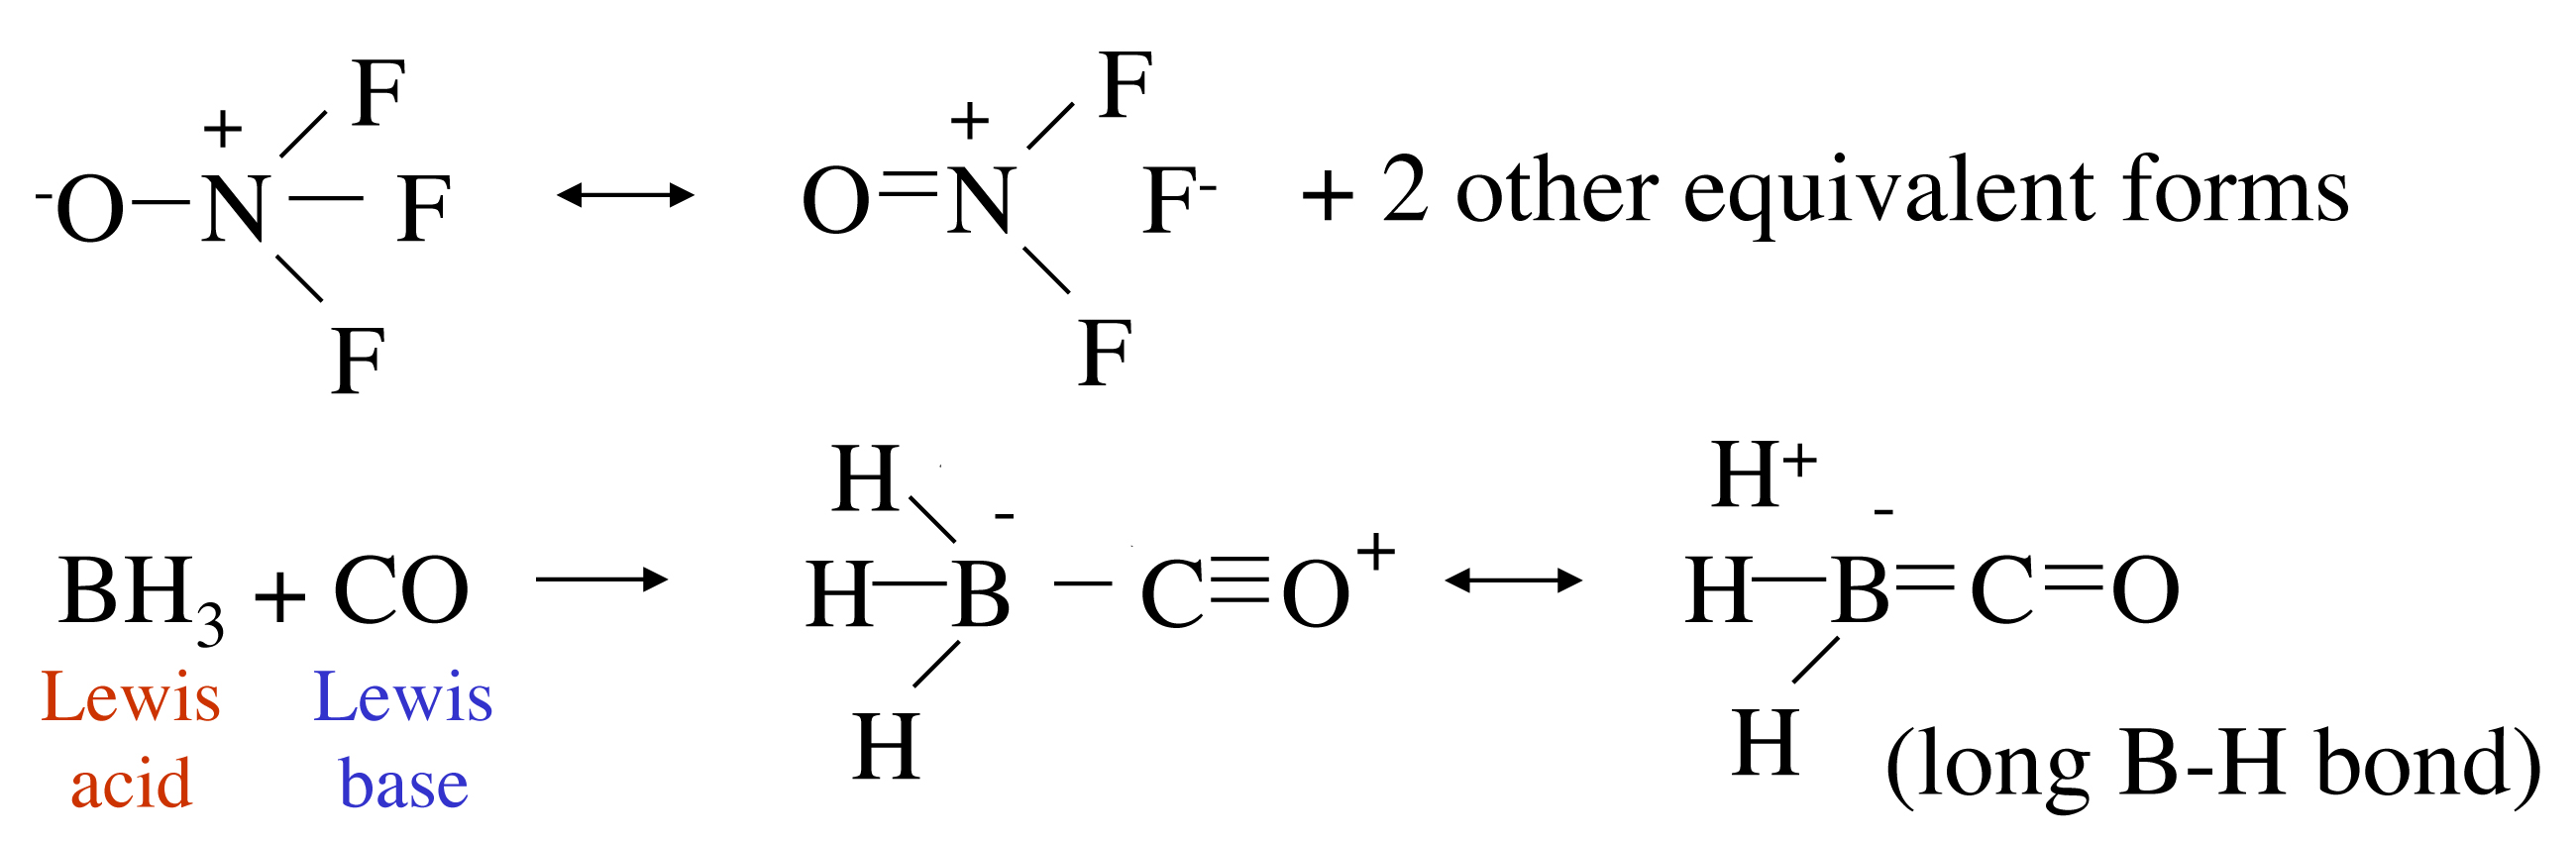 Hcno resonance structures with formal charges